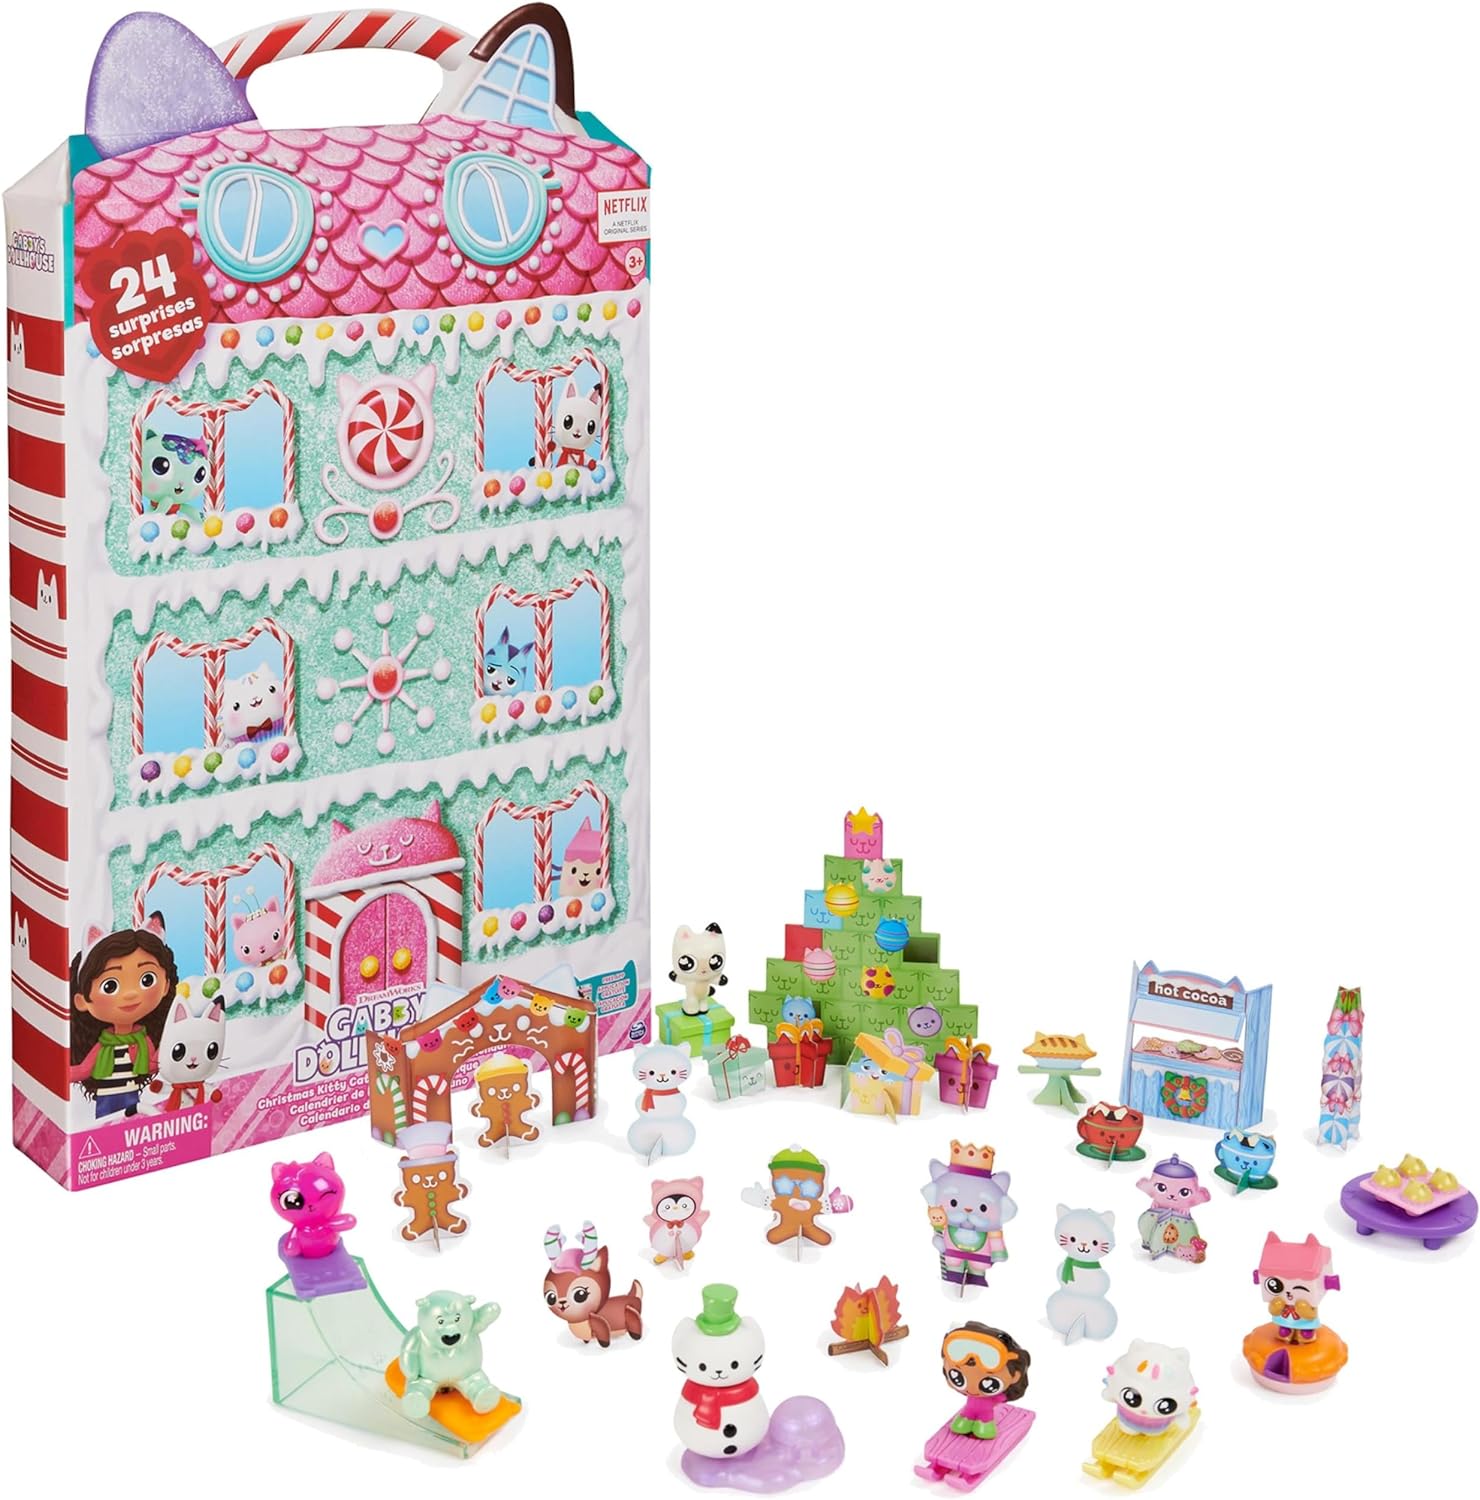 Gabby \ 's Dollhouse, Advent Calendar With 24 Surprises, Figures, Stickers and Dollhouse Accessories, Gift for Children from 3 Years